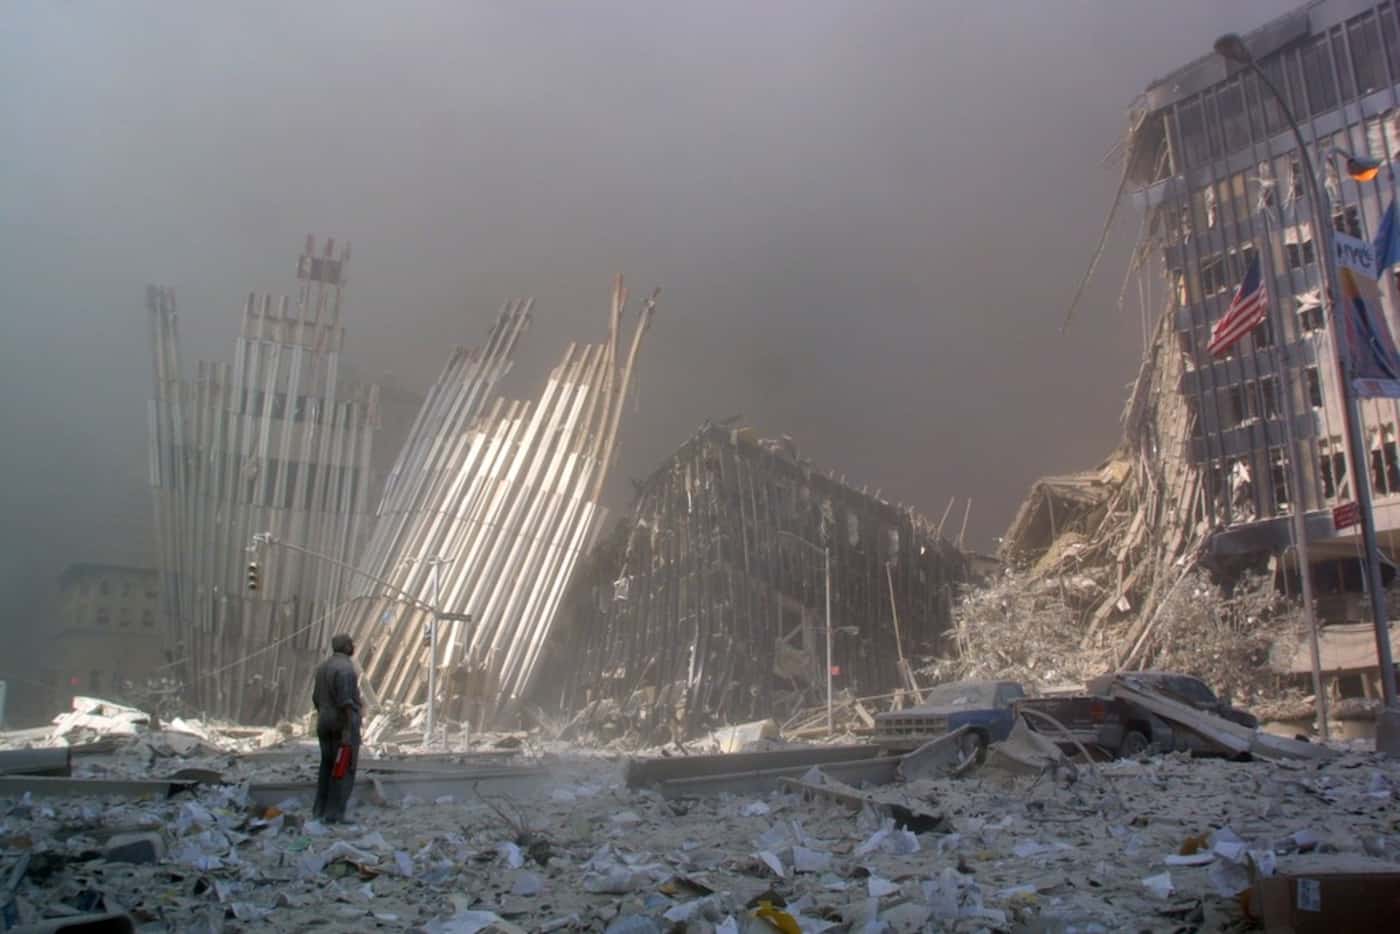 In this file photo taken on Sept. 11, 2001, a man stands in the rubble, calling out to ask...